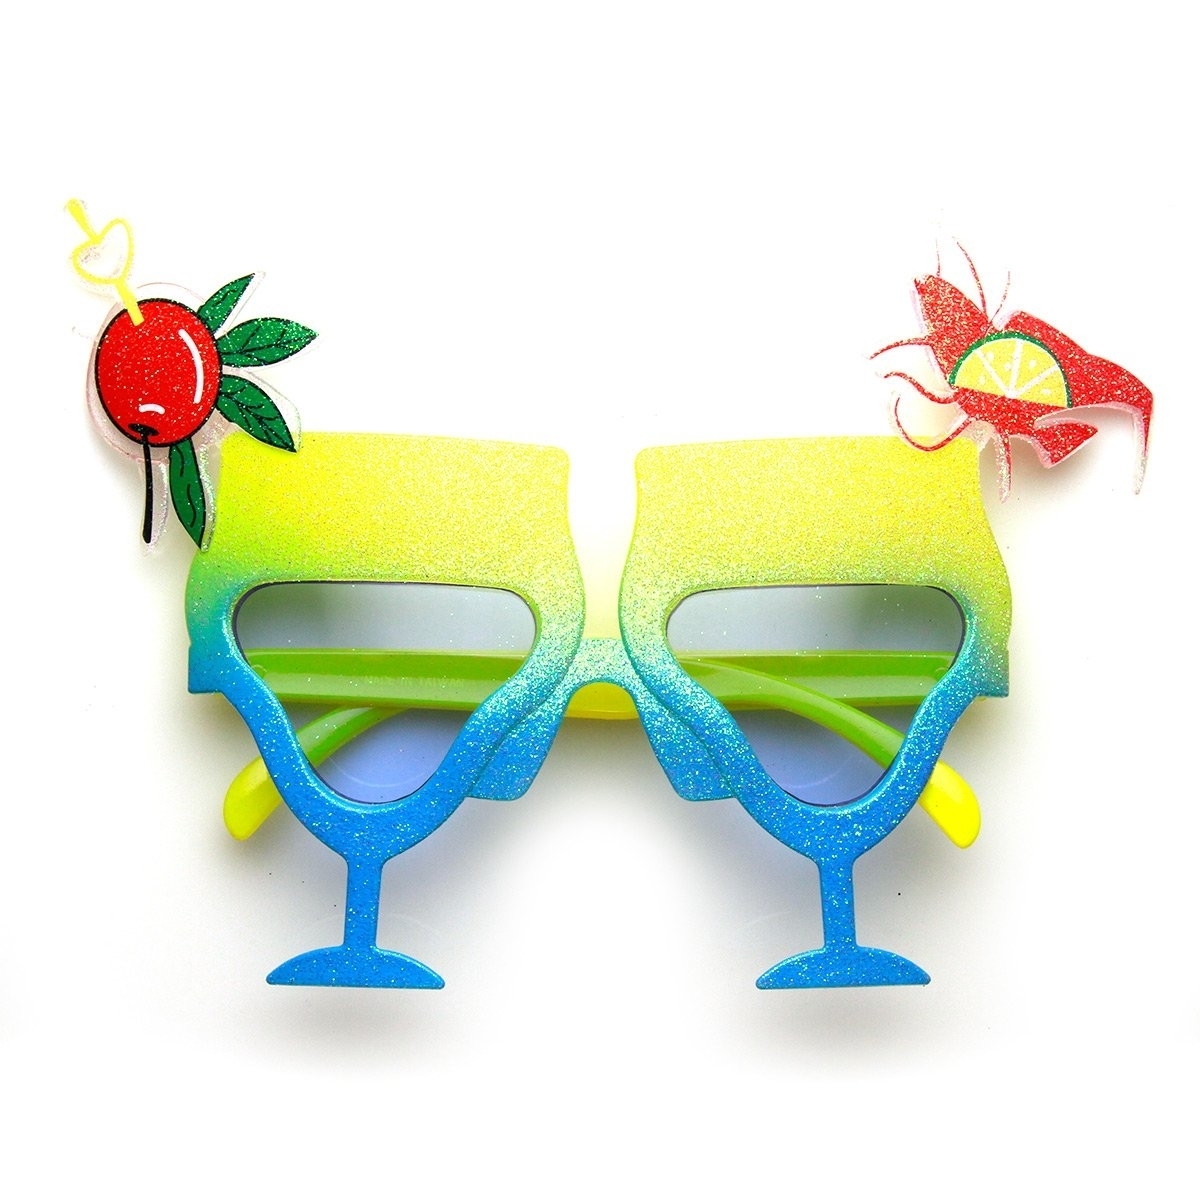 Cocktail Mixed Drink Party Time Celebration Novelty Sunglasses - Orange-Red Red